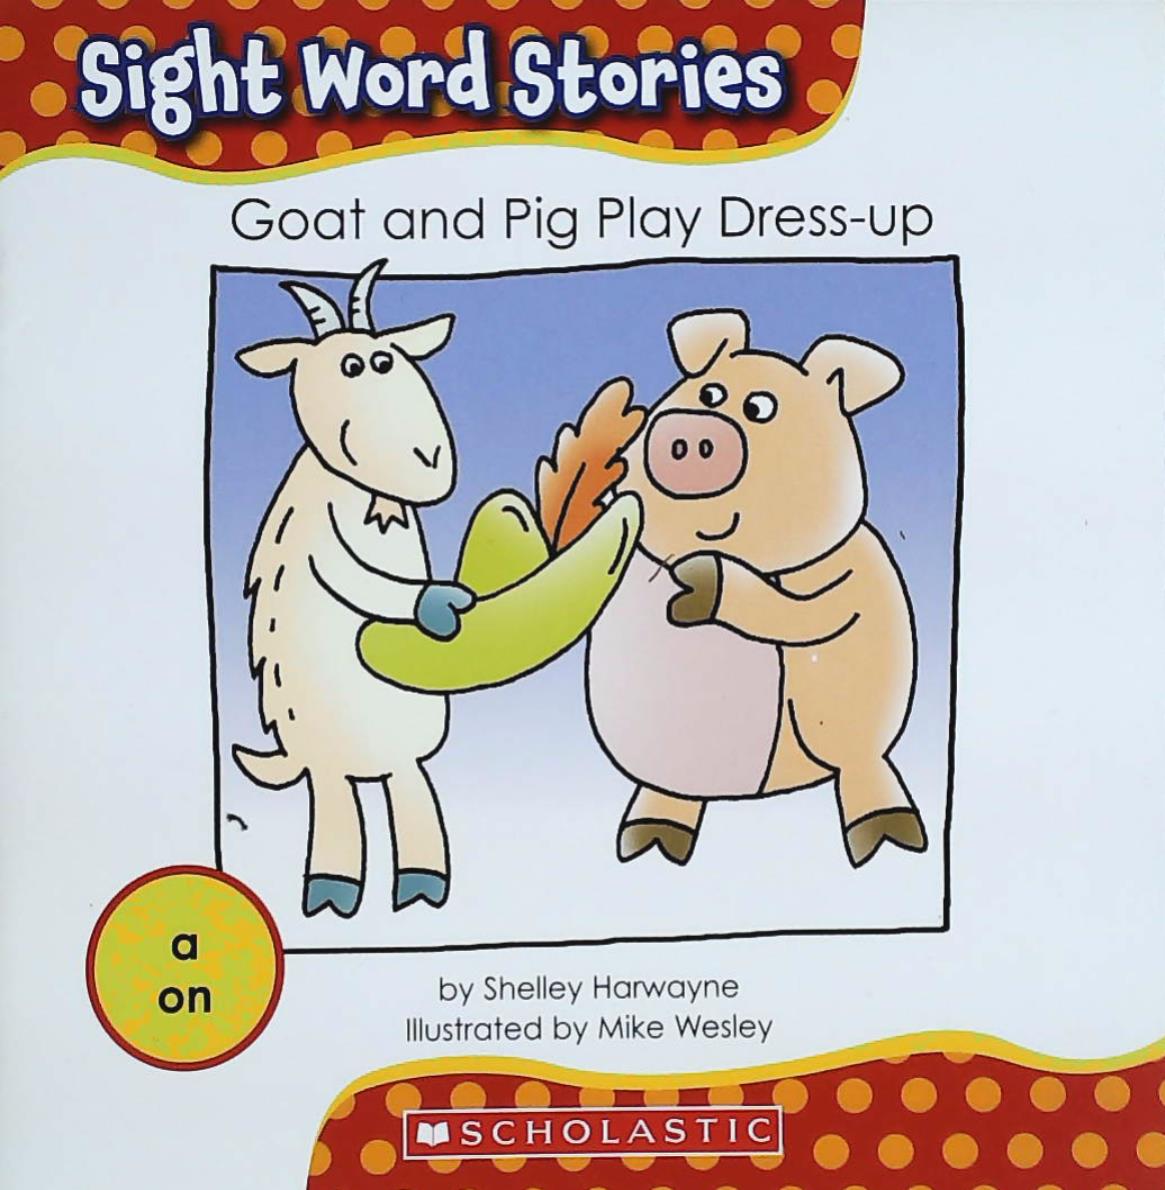 Livre ISBN 0545167698 Sight Word Stories : Goat and Pig Play Dress-up (Shelley Harwayne)